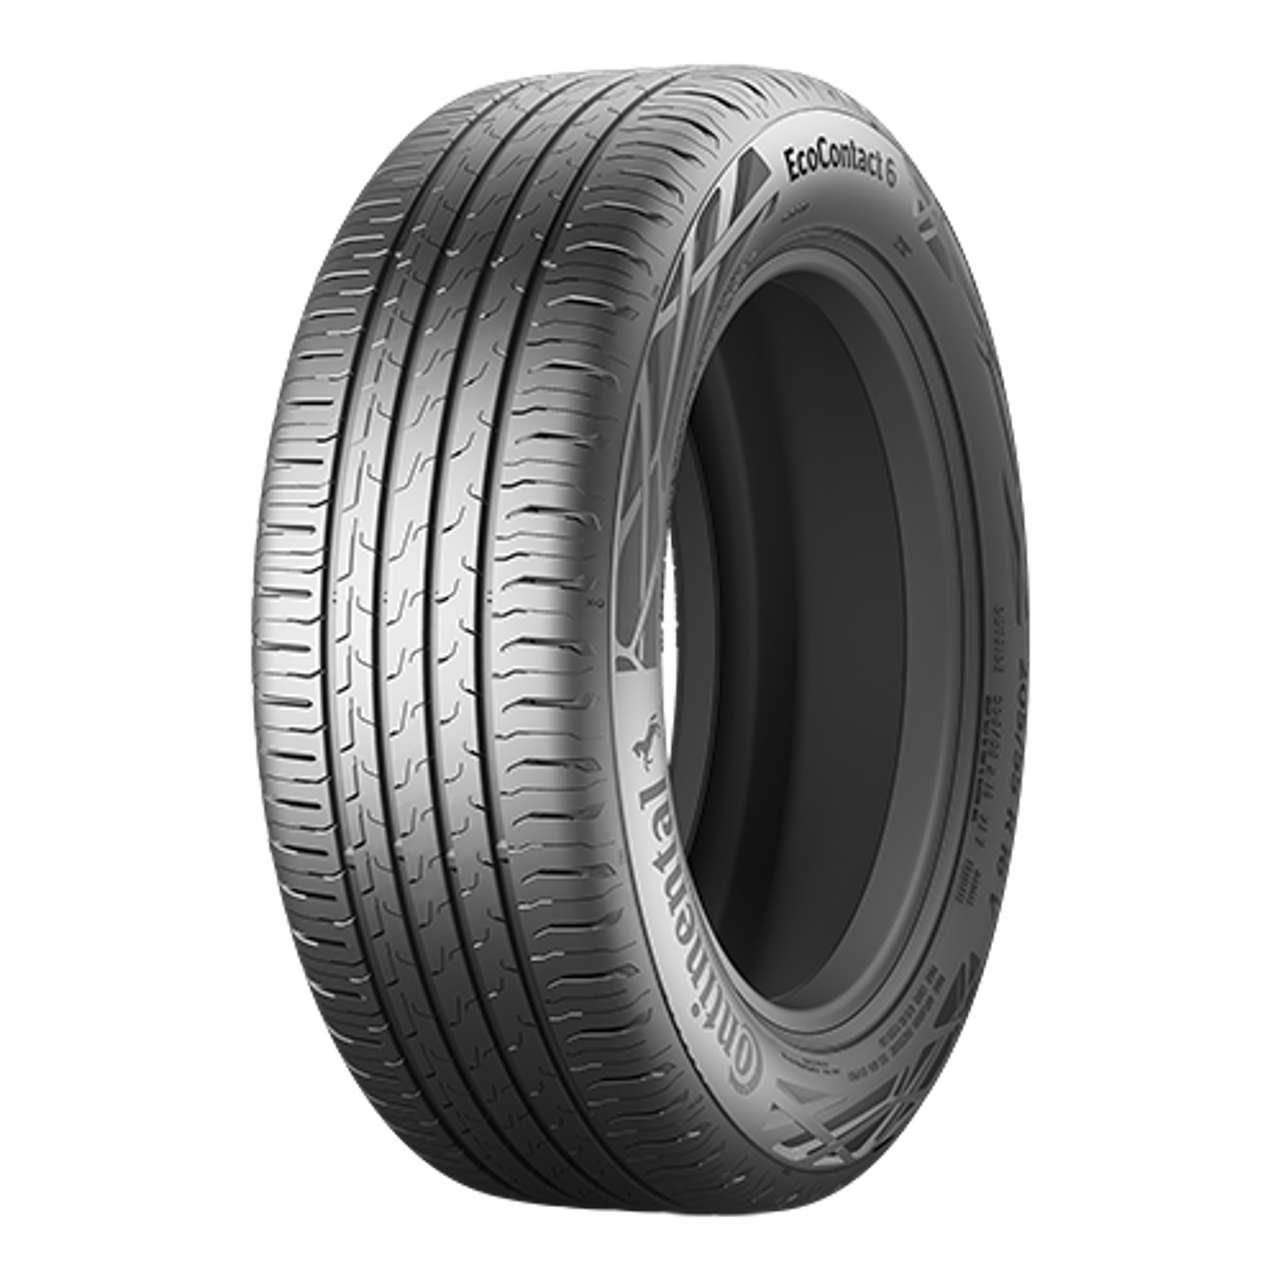 CONTINENTAL ECOCONTACT 6 (EVc) 195/55R16 87H